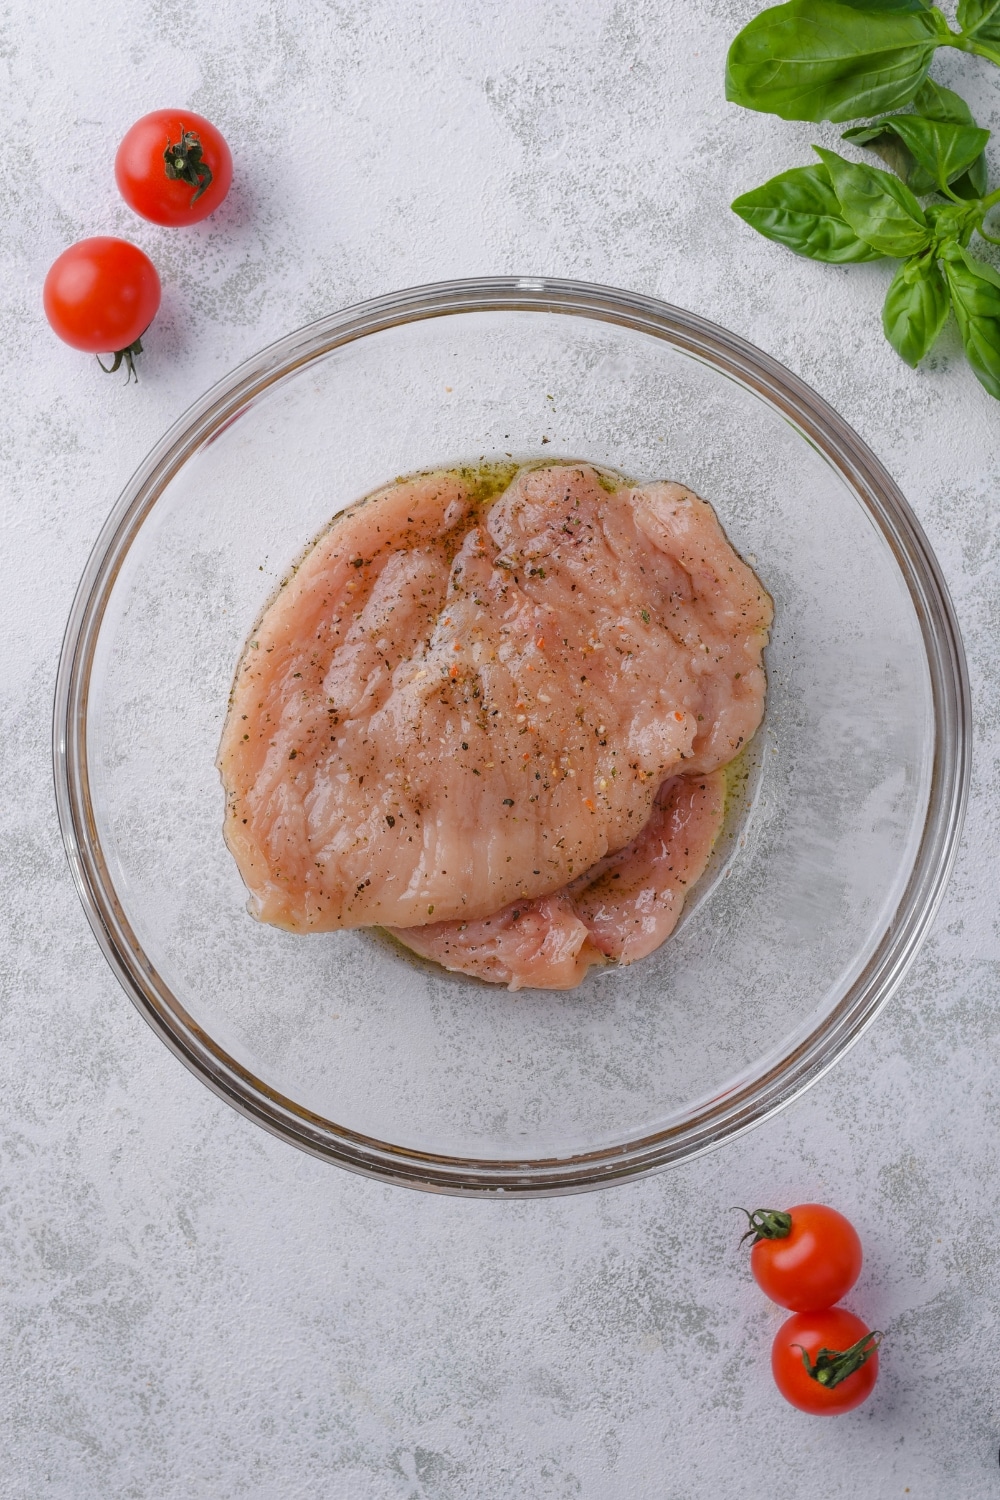 A glass bowl of raw chicken breast filets covered in seasoning.